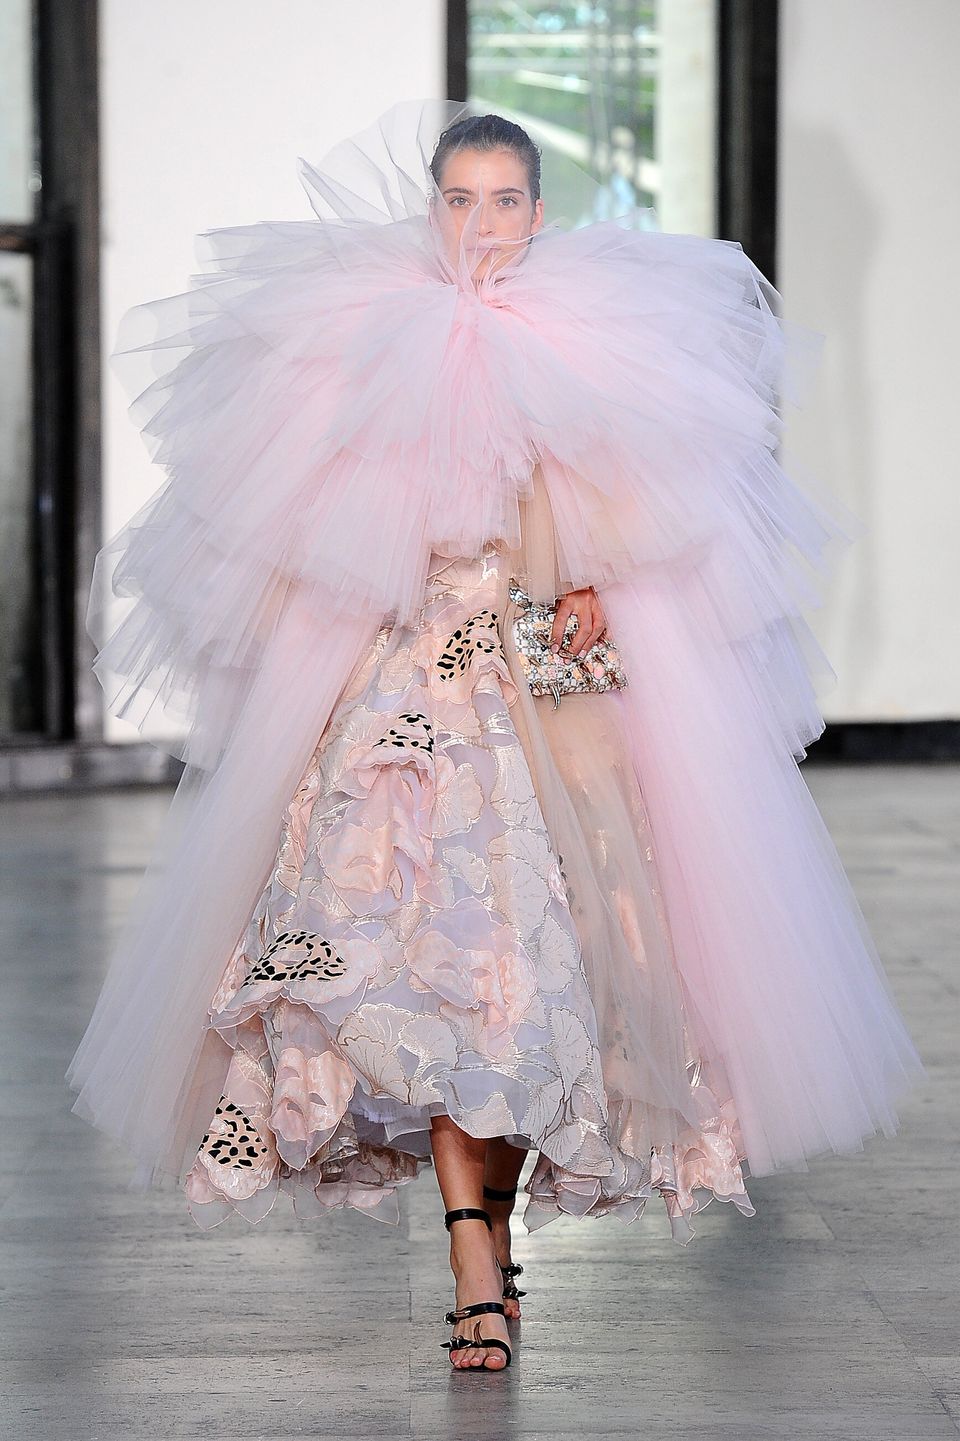 All The Craziest Looks From Paris Couture Fashion Week | HuffPost Life